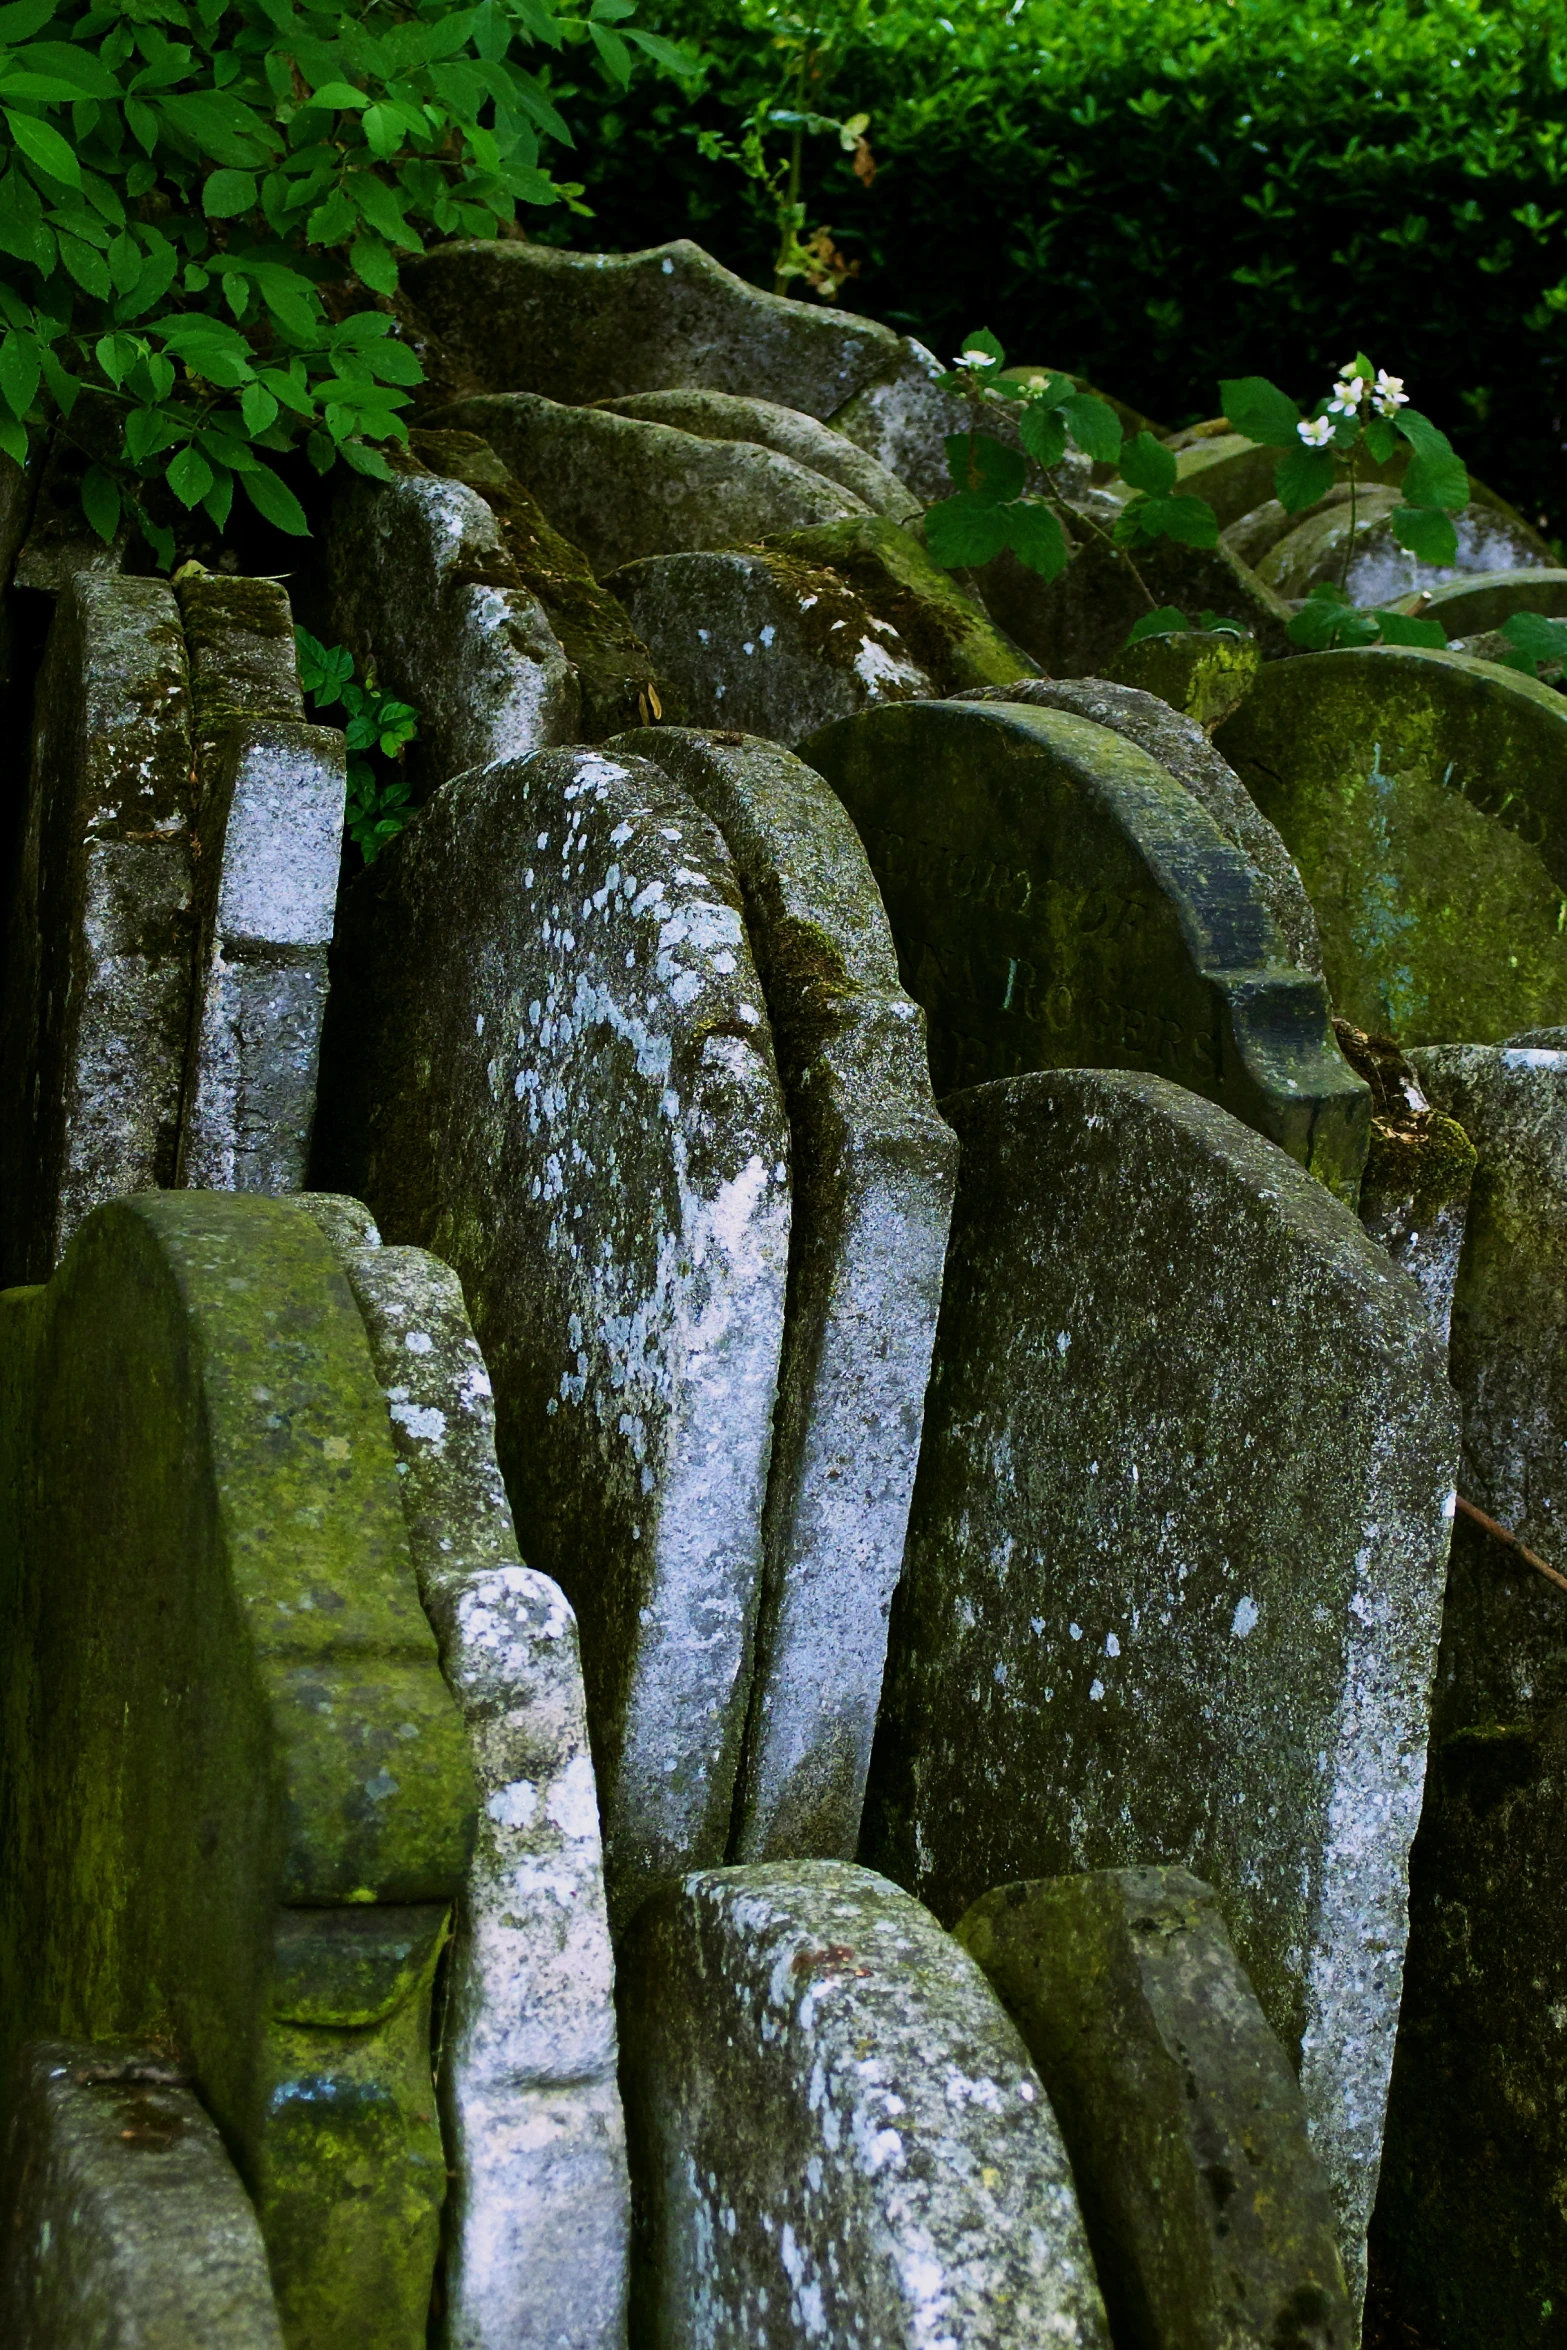 an image of many large rocks with moss growing on them